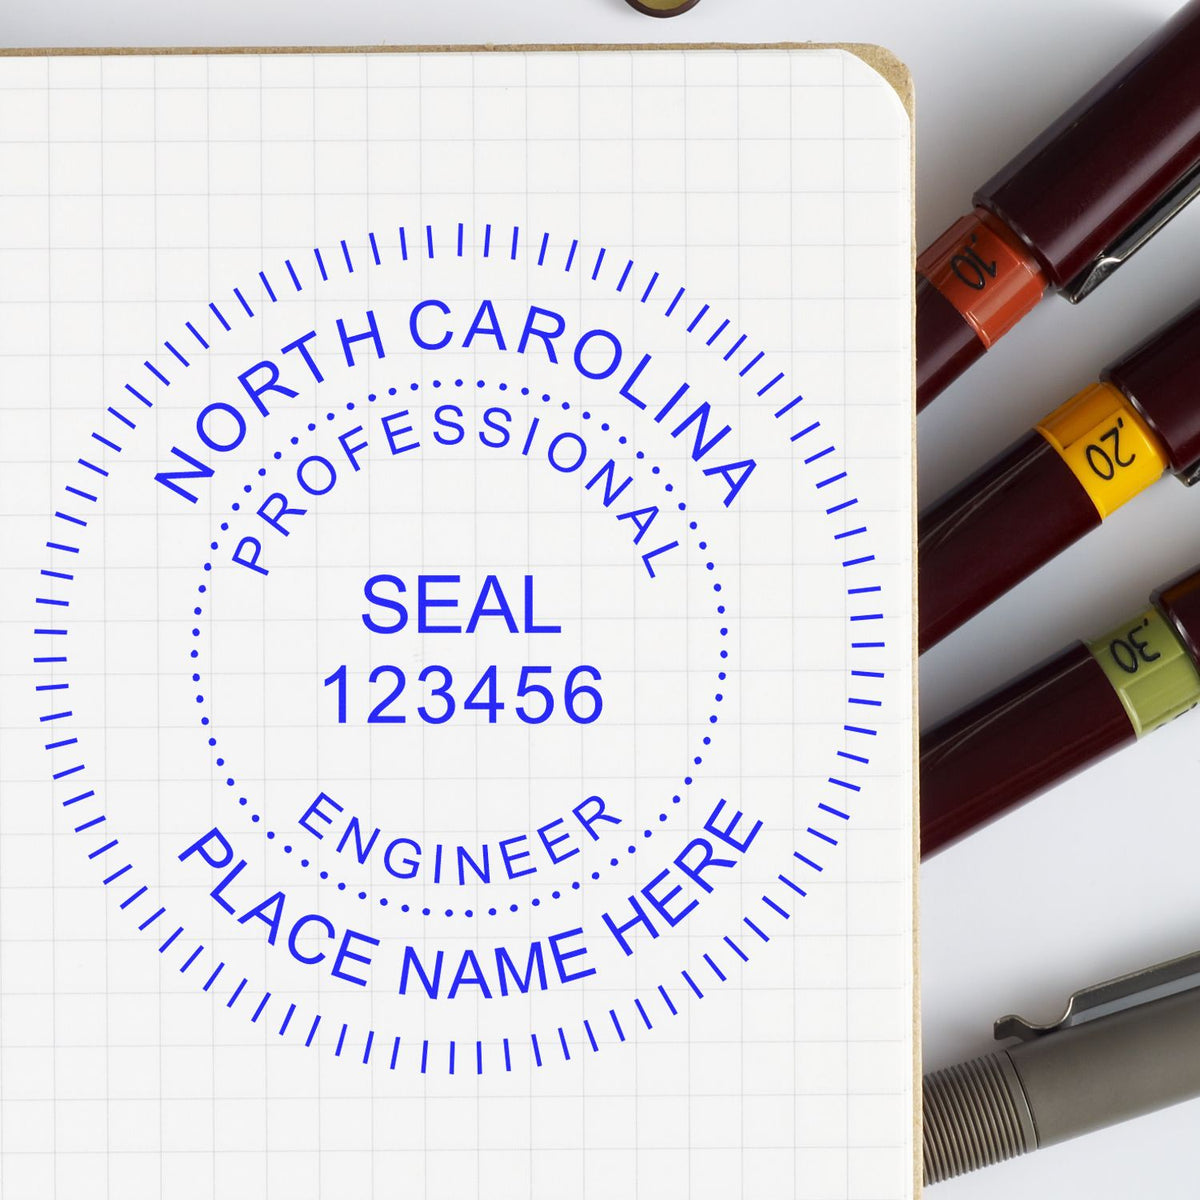 The Digital North Carolina PE Stamp and Electronic Seal for North Carolina Engineer stamp impression comes to life with a crisp, detailed photo on paper - showcasing true professional quality.